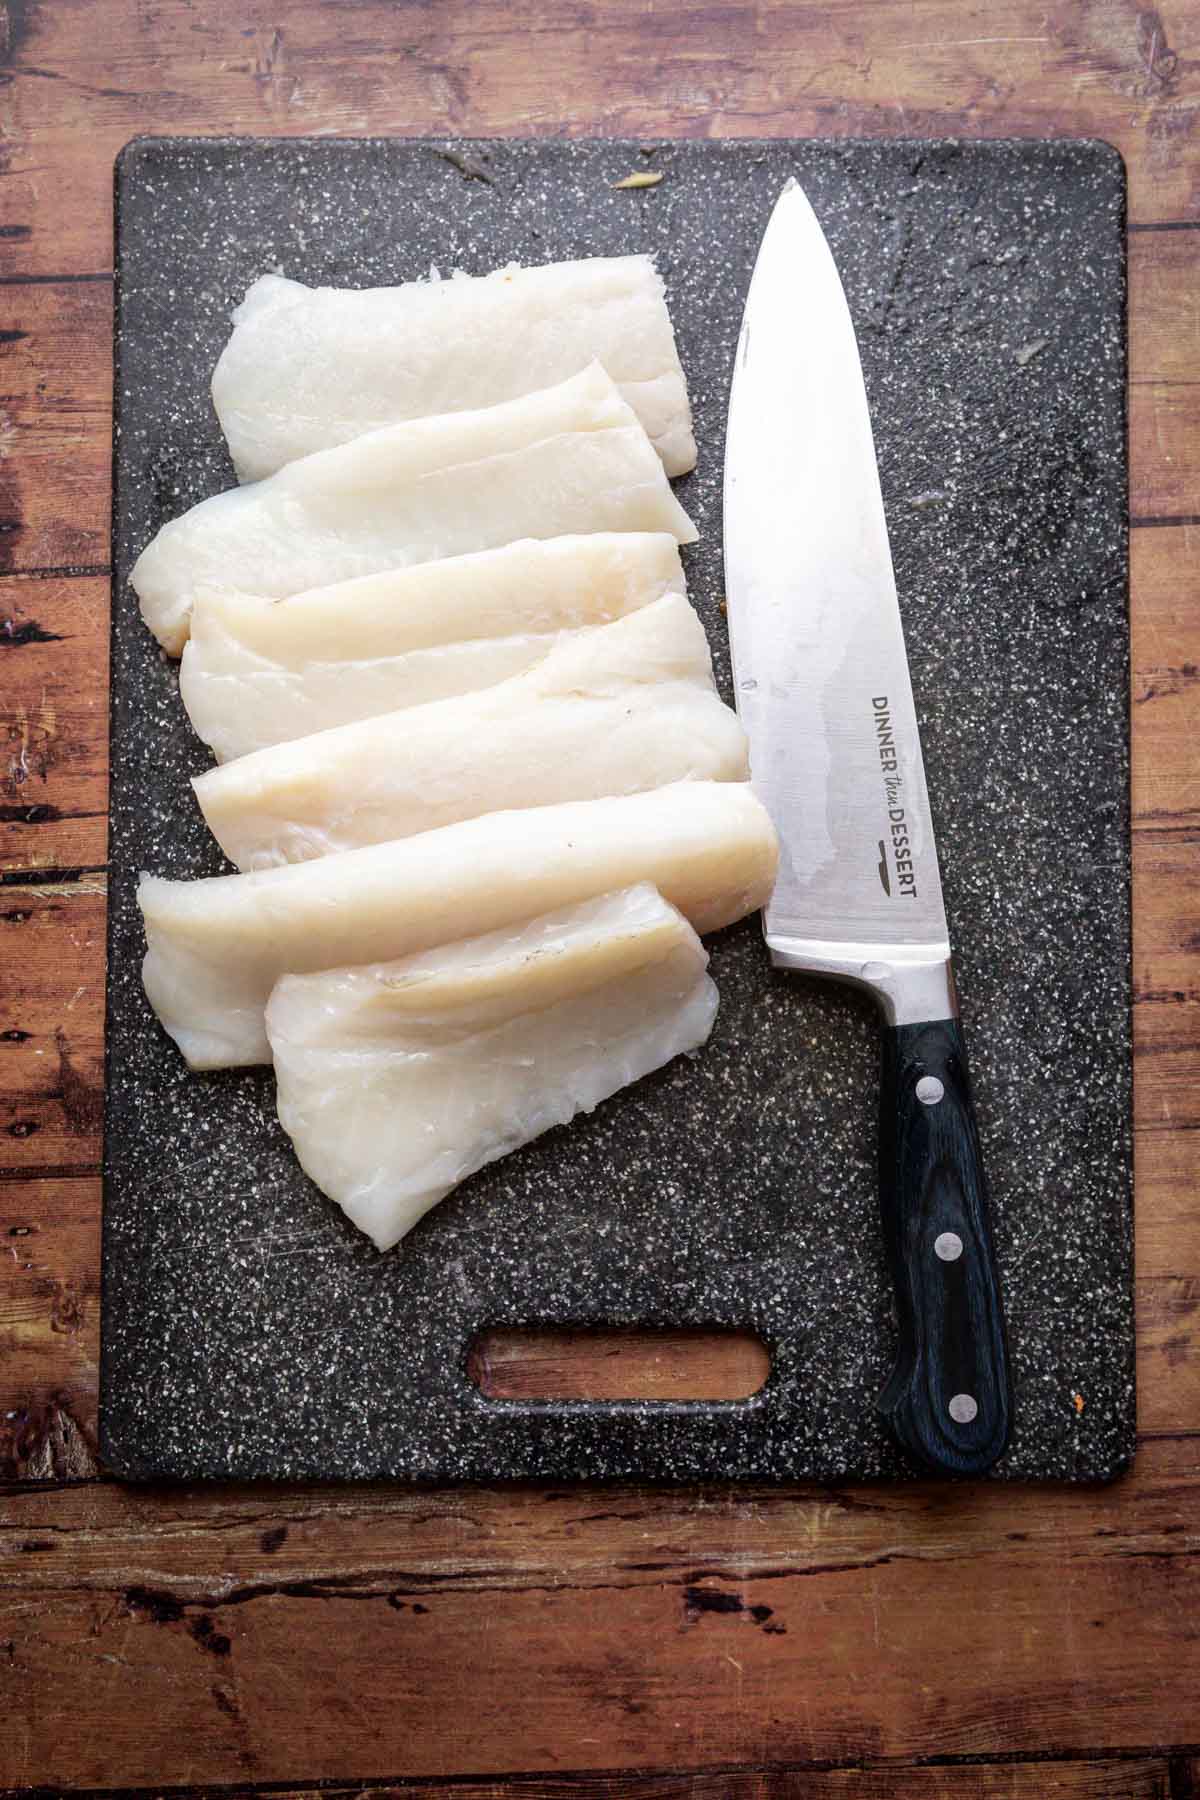 Fish Soup fish fillets and knife on cutting board